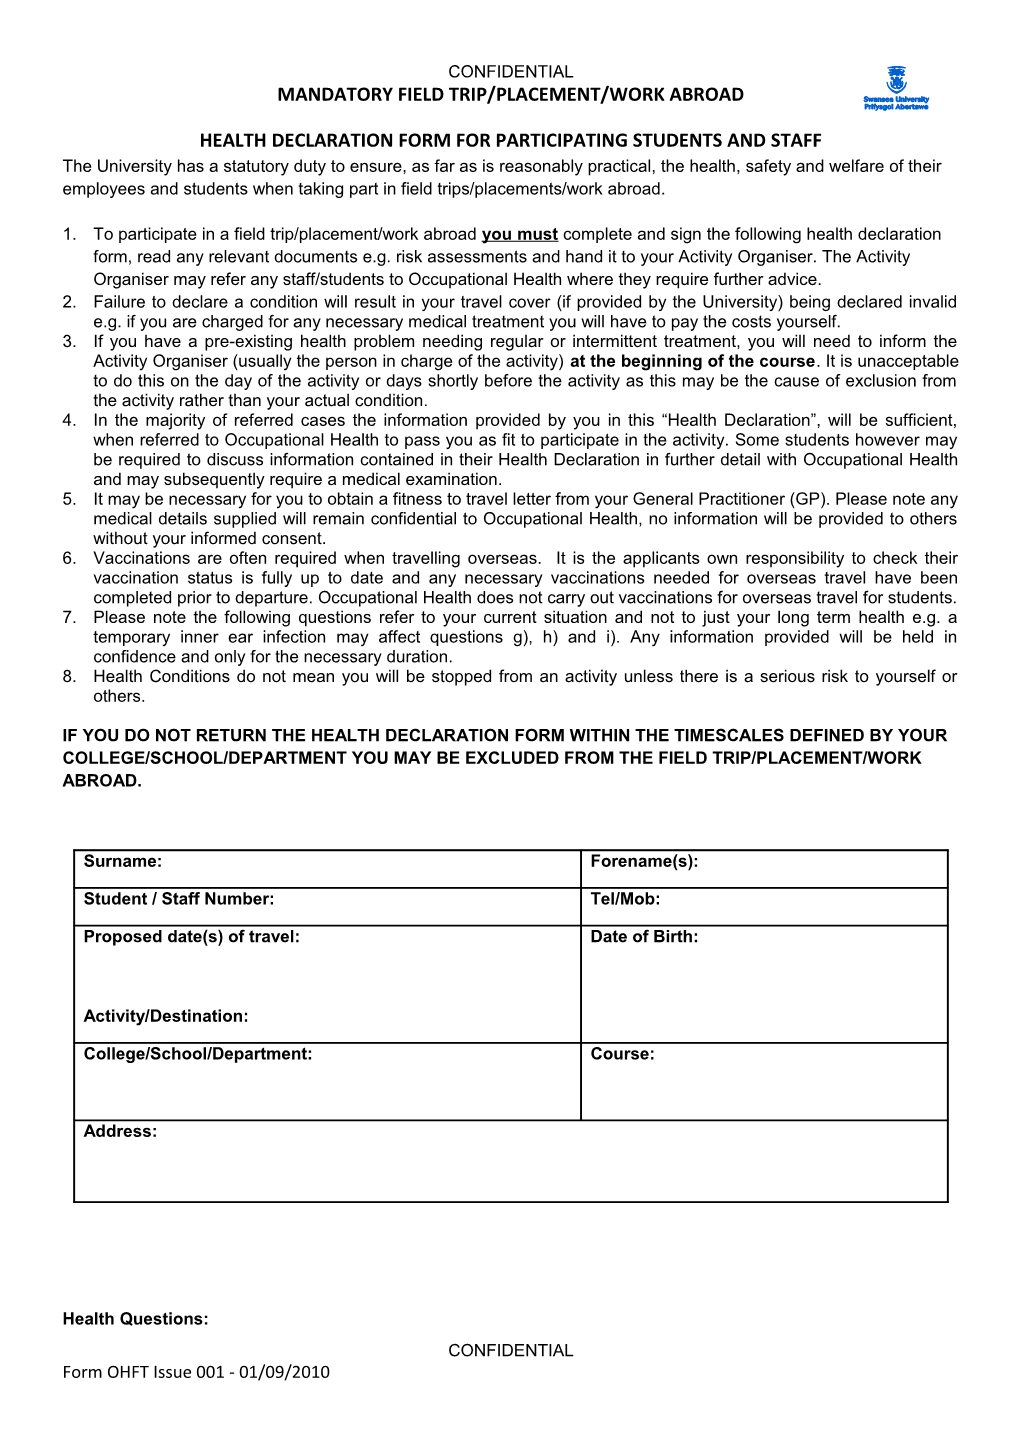 Health Declaration Form for Participating Students and Staff